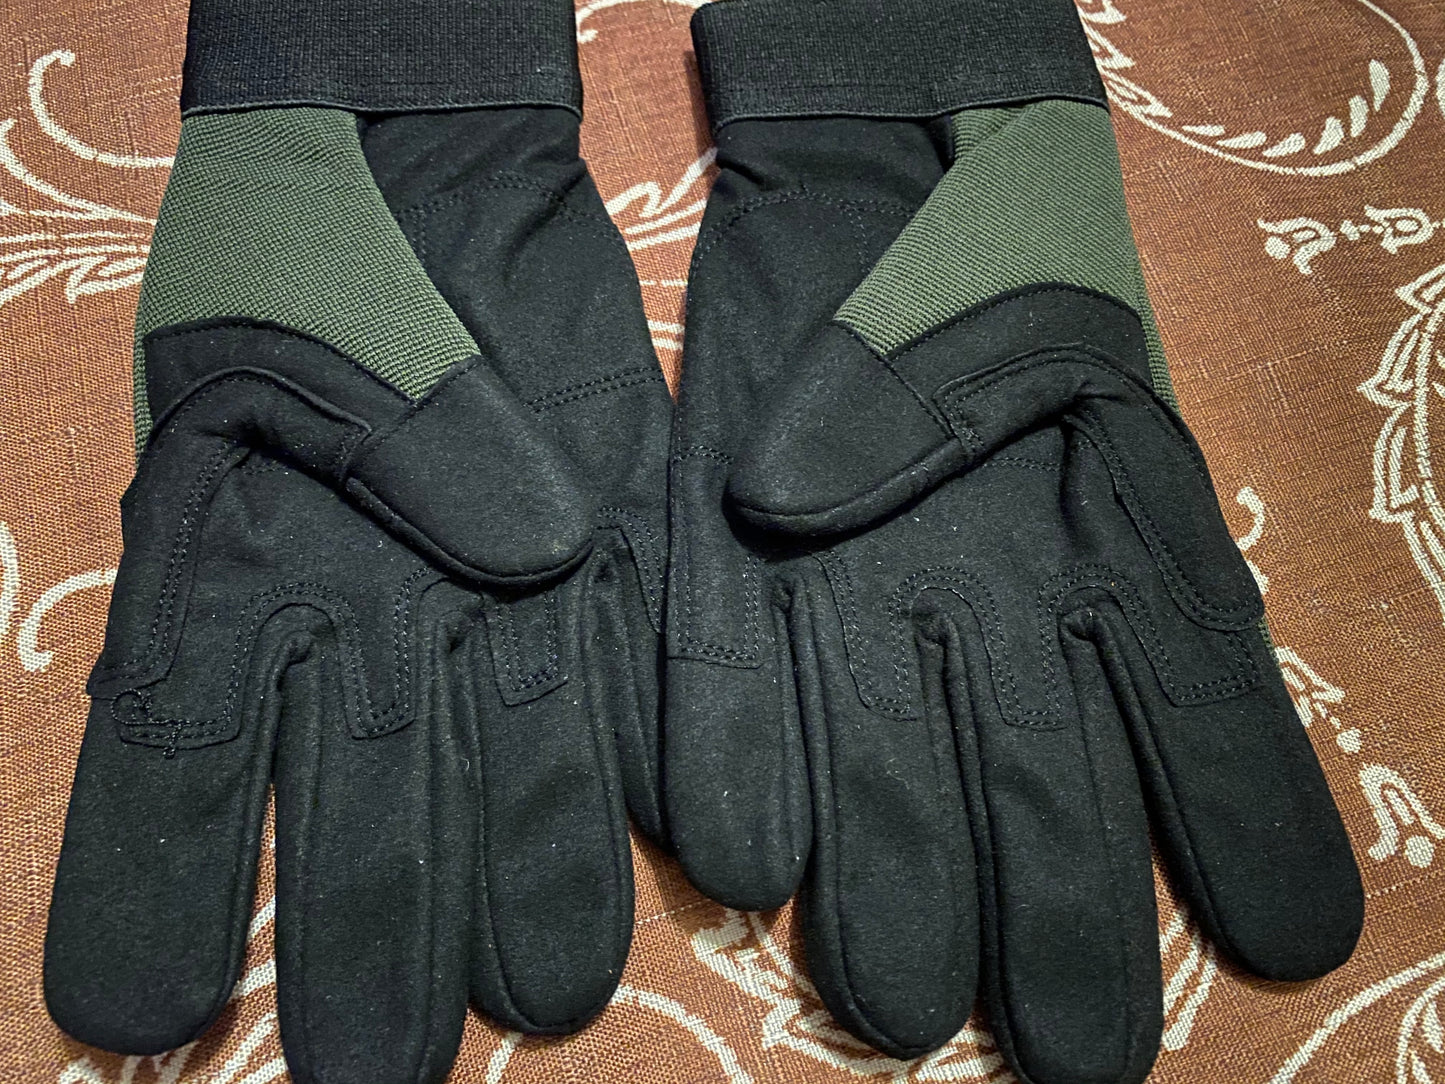 Local Lightweight All Purpose Duty Gloves (size & color options listed)